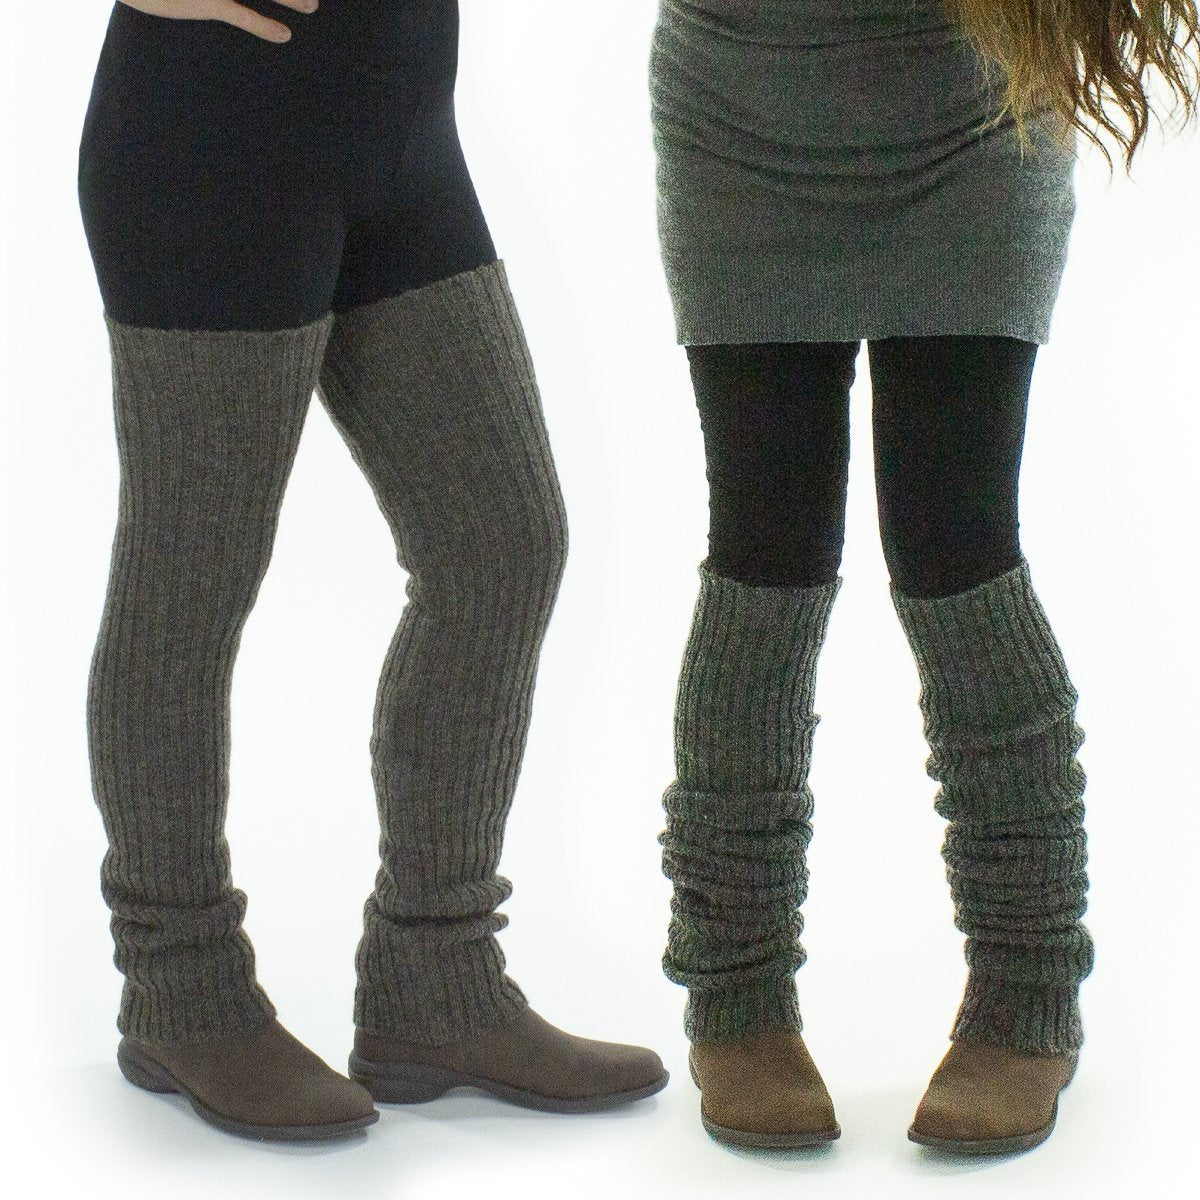 Women's Solid Color Knitted Leg Warmer Boots Socks With Zipper Over Knee  Foot Covers For Warmth Yoga Leg Warmers